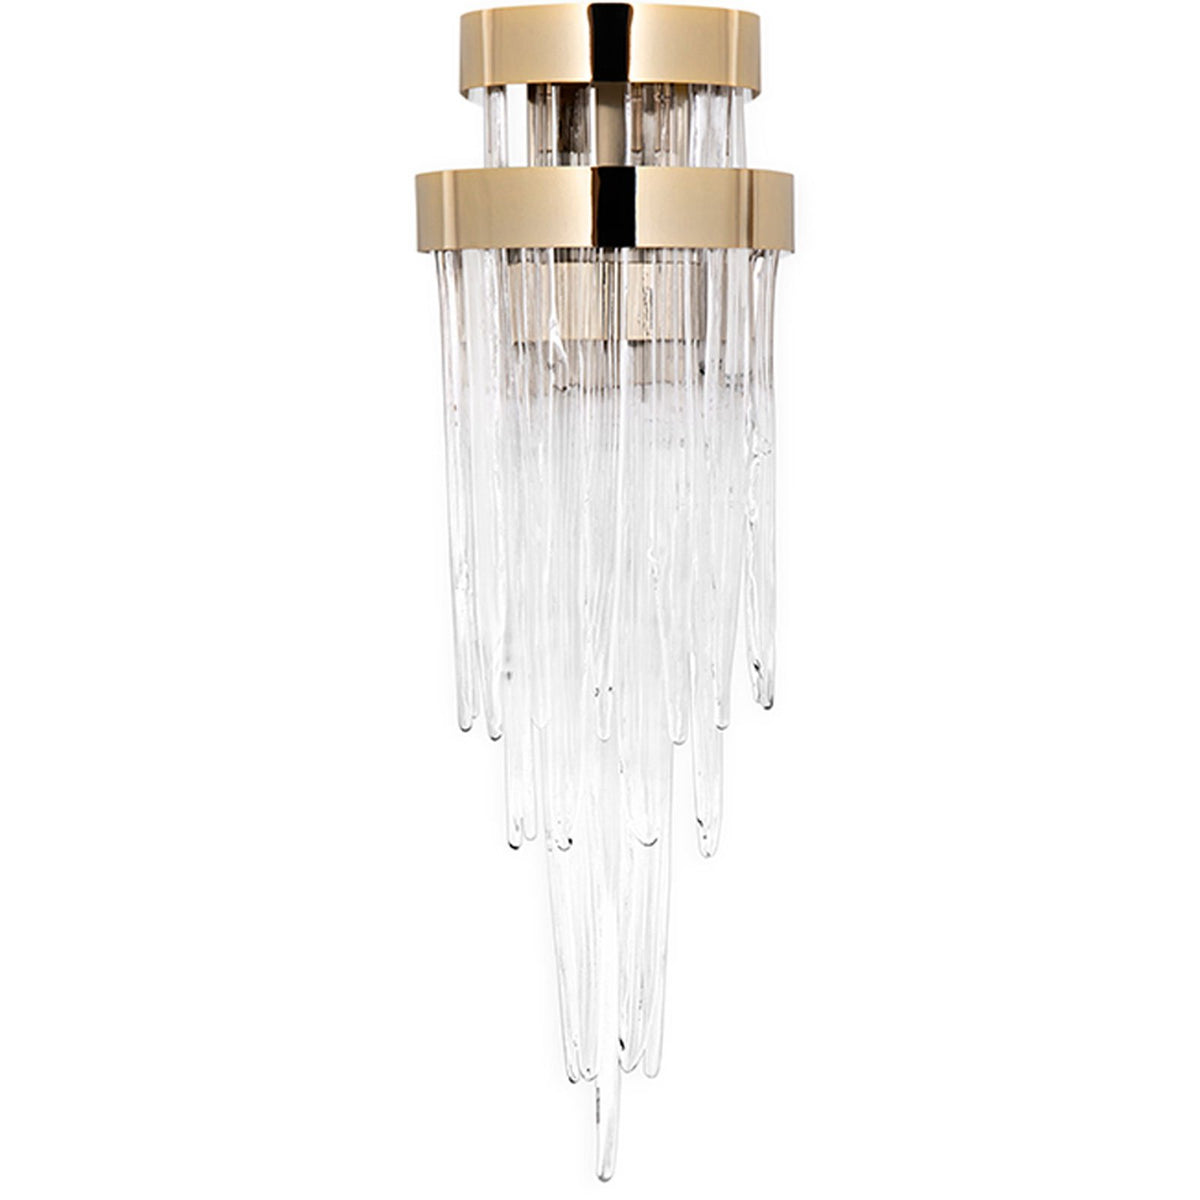 Babel Wall Sconce